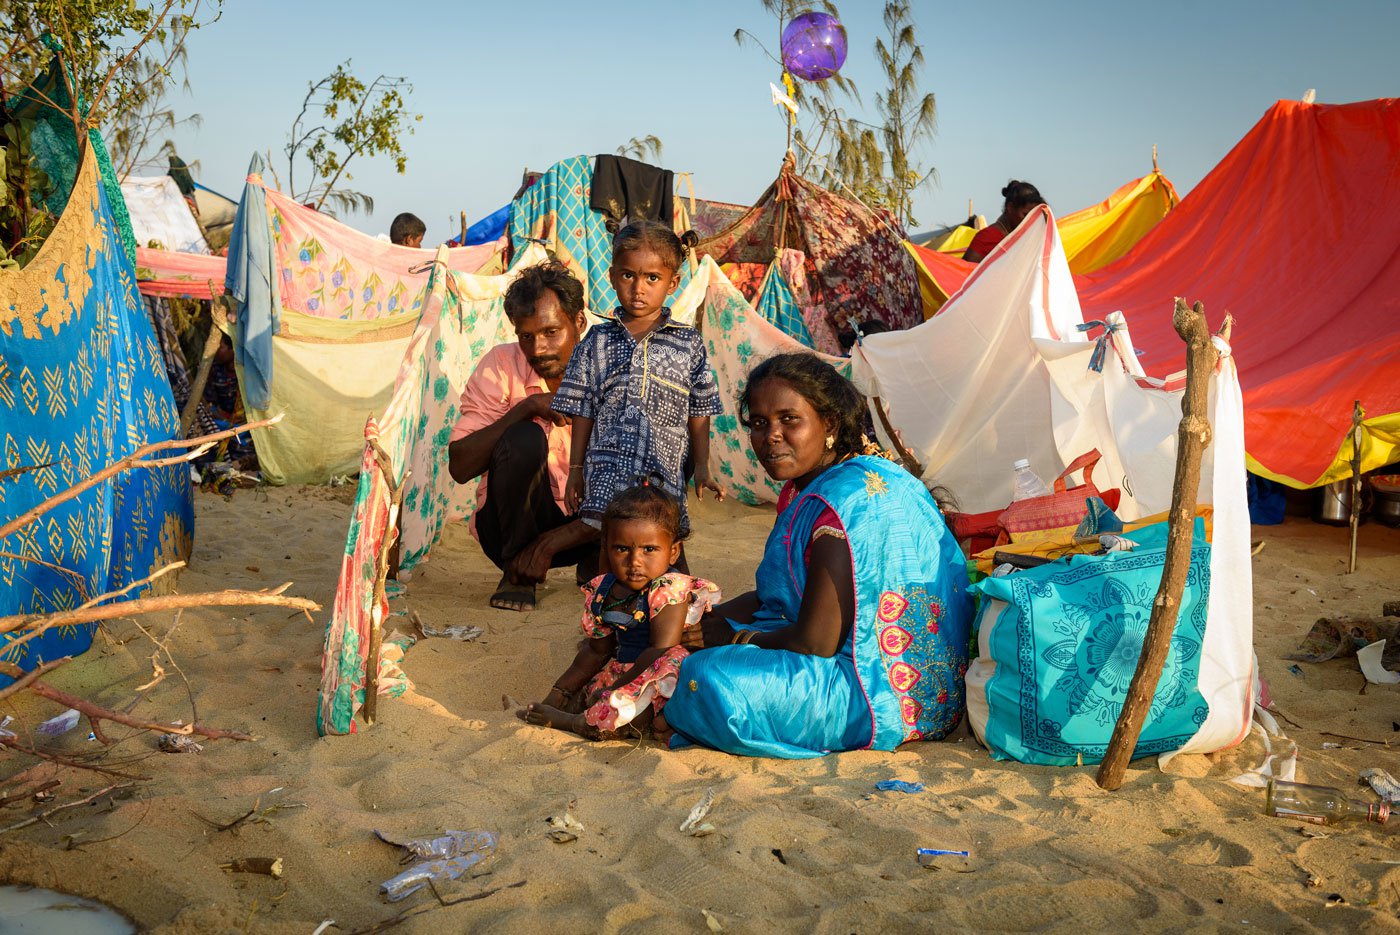 After spending a few days at the beach, the Irulars will wrap up their tents and head home